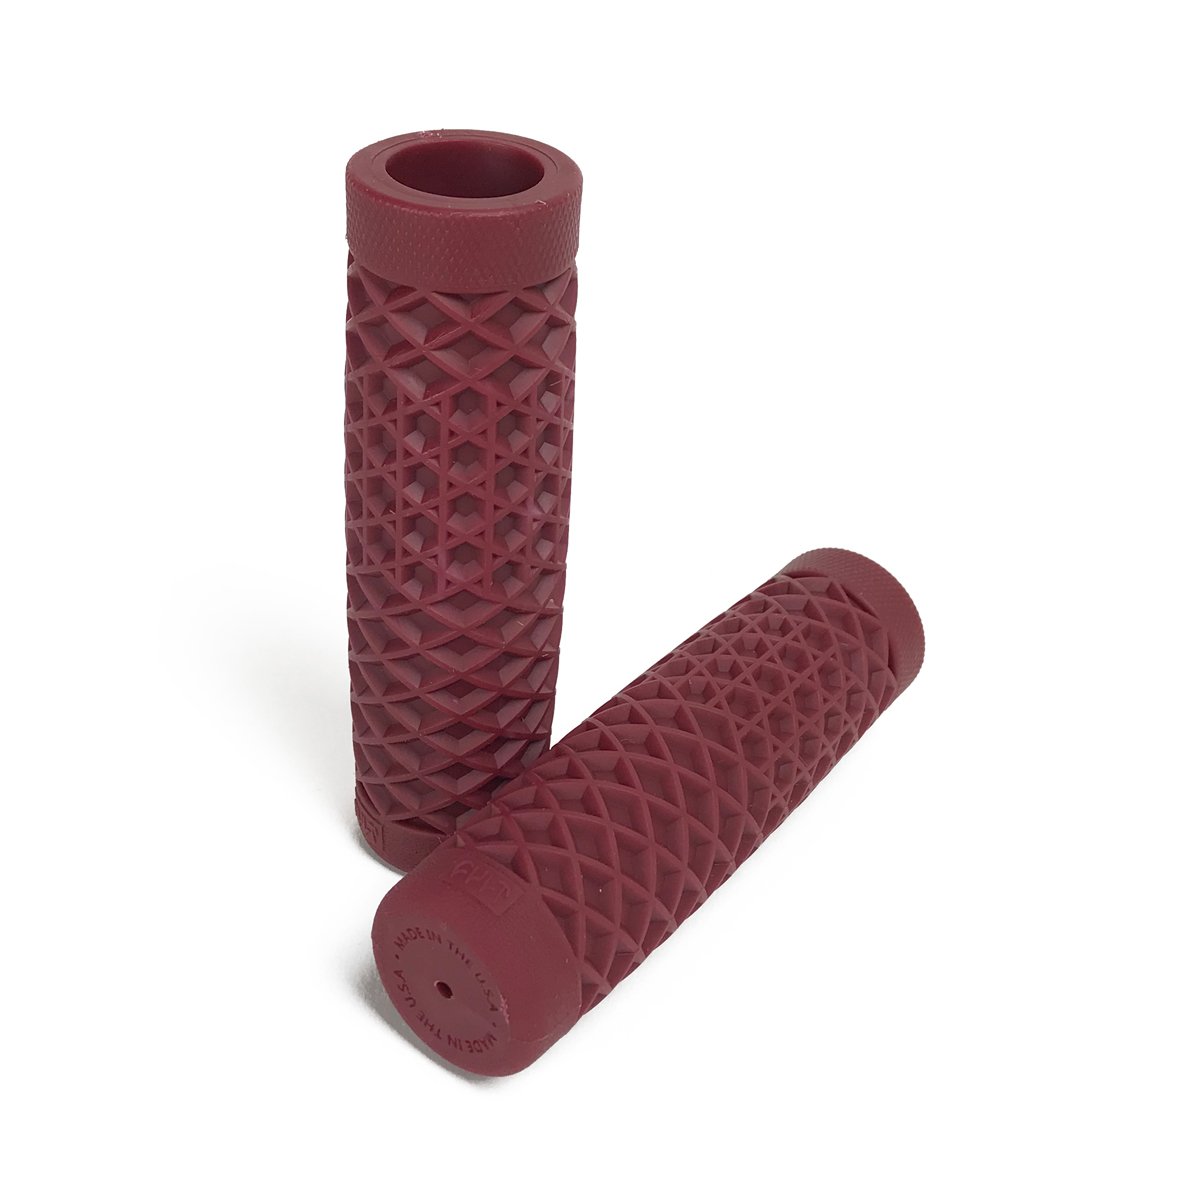 A pair of ODI Vans + Cult Motorcycle Grips - 1" Ox Blood on a white background.